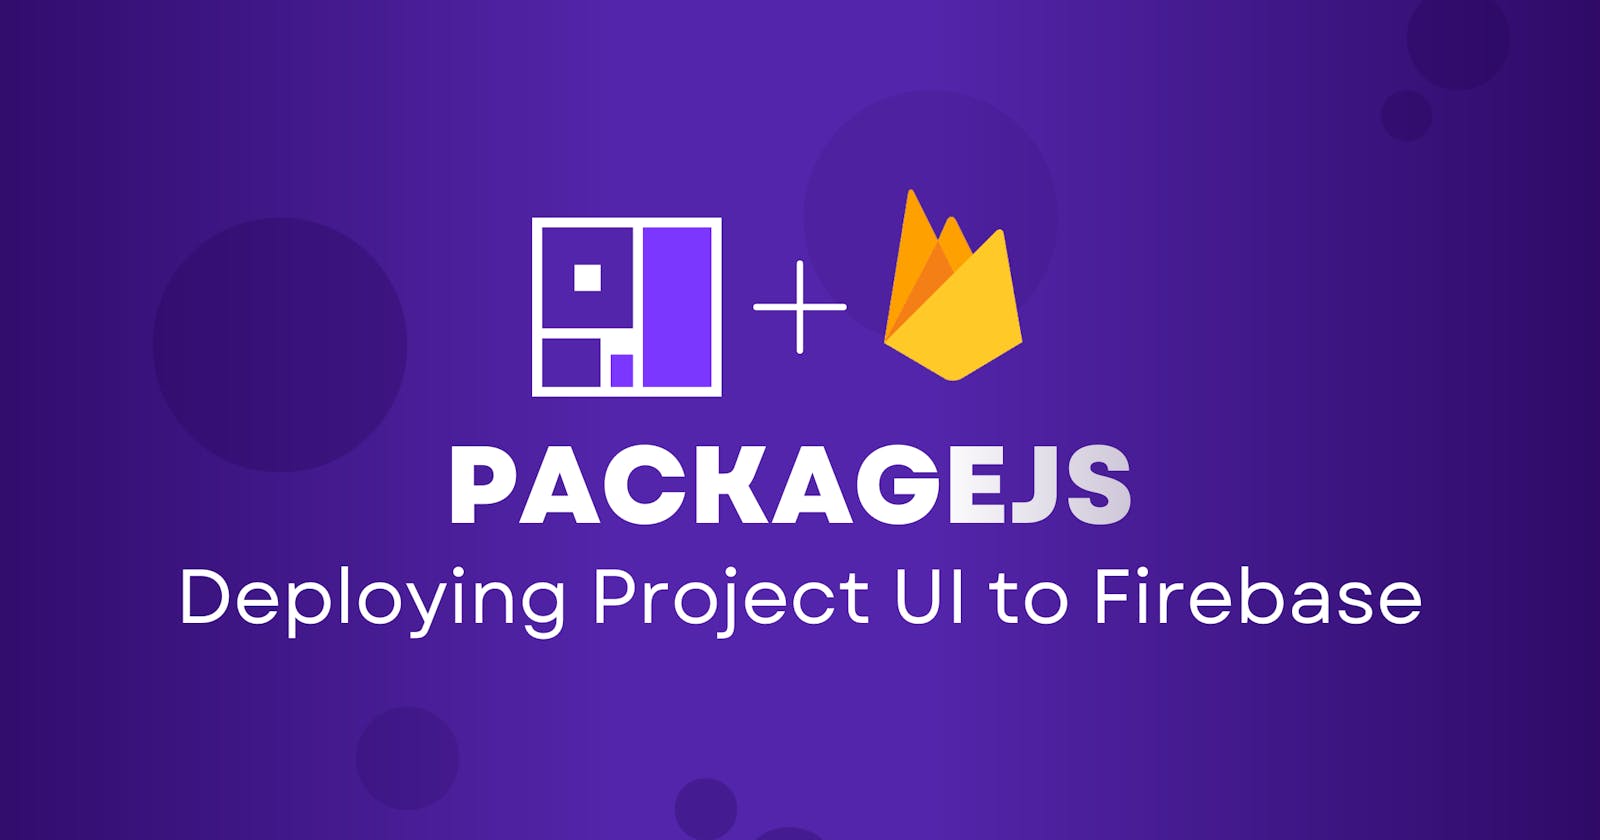 Deploying a PackageJS Project to UI Firebase (PRO TIP)